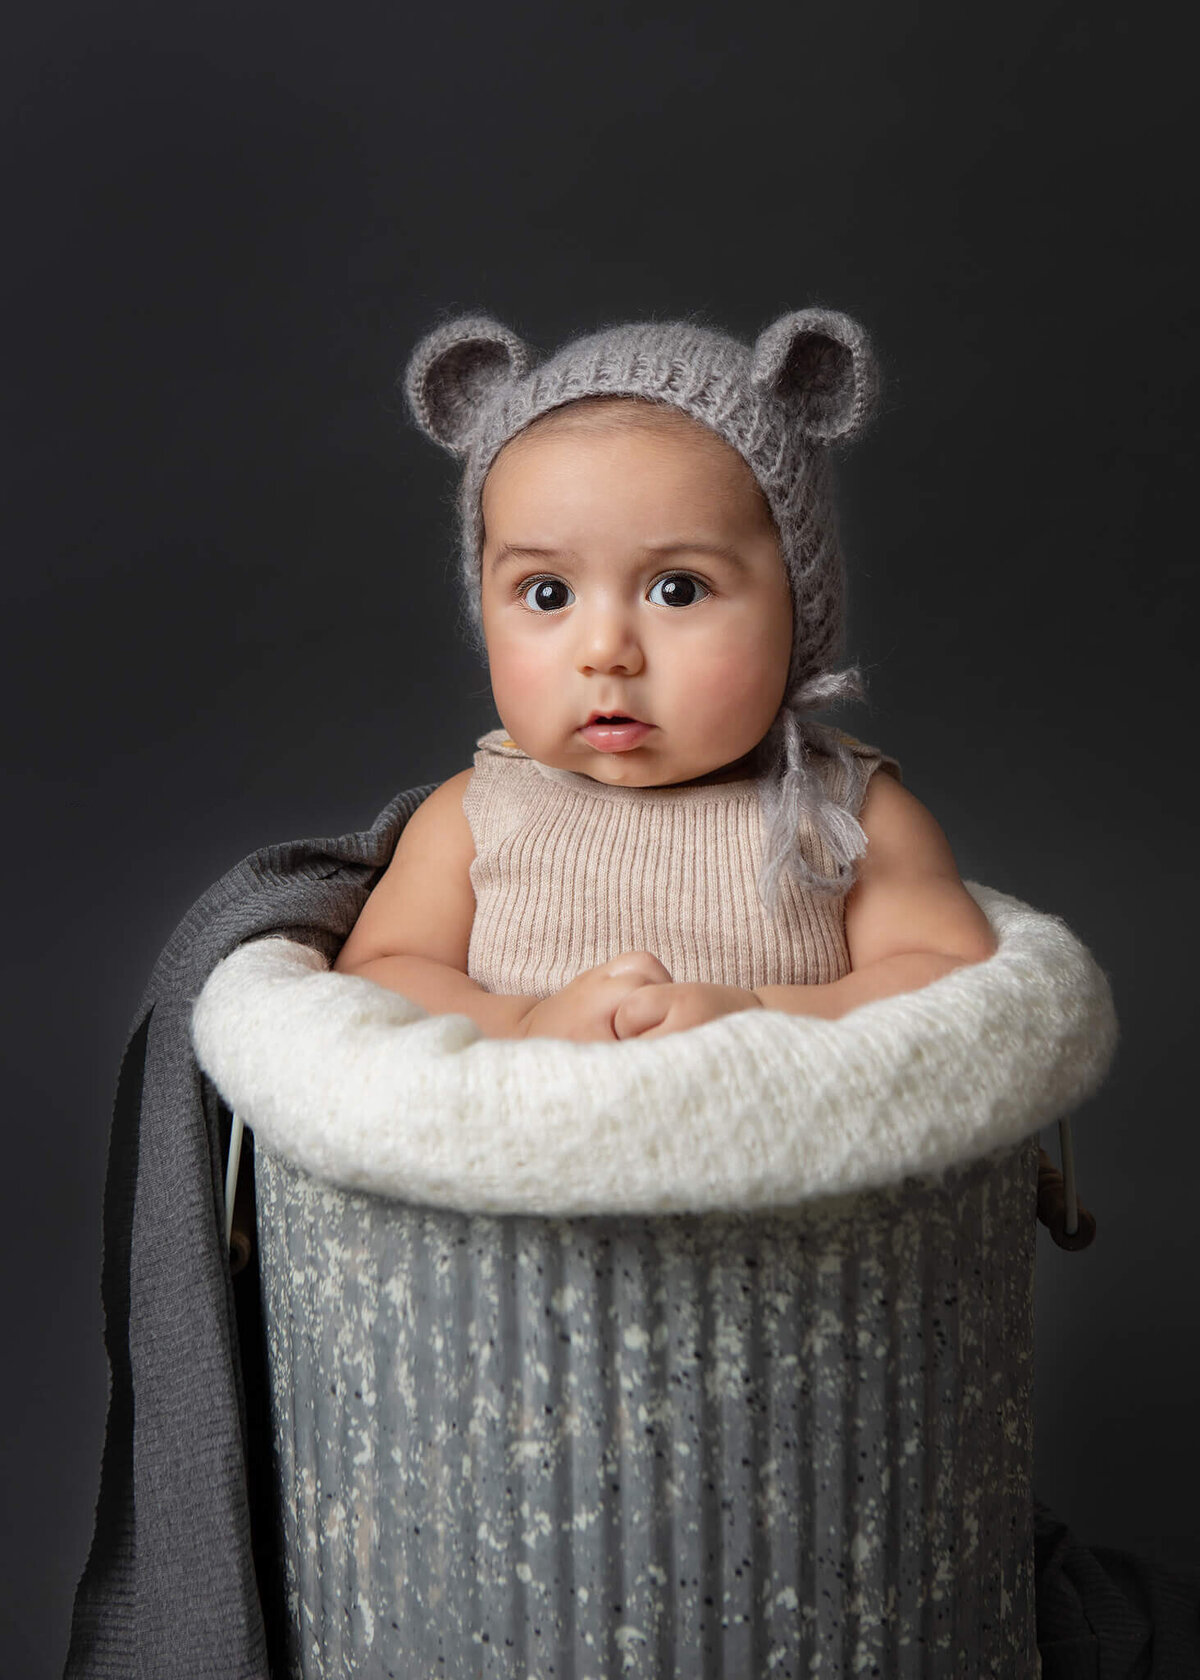 Baby in a little mouse bonnet sitting in a bucket photographed in Woodland Hills, CA